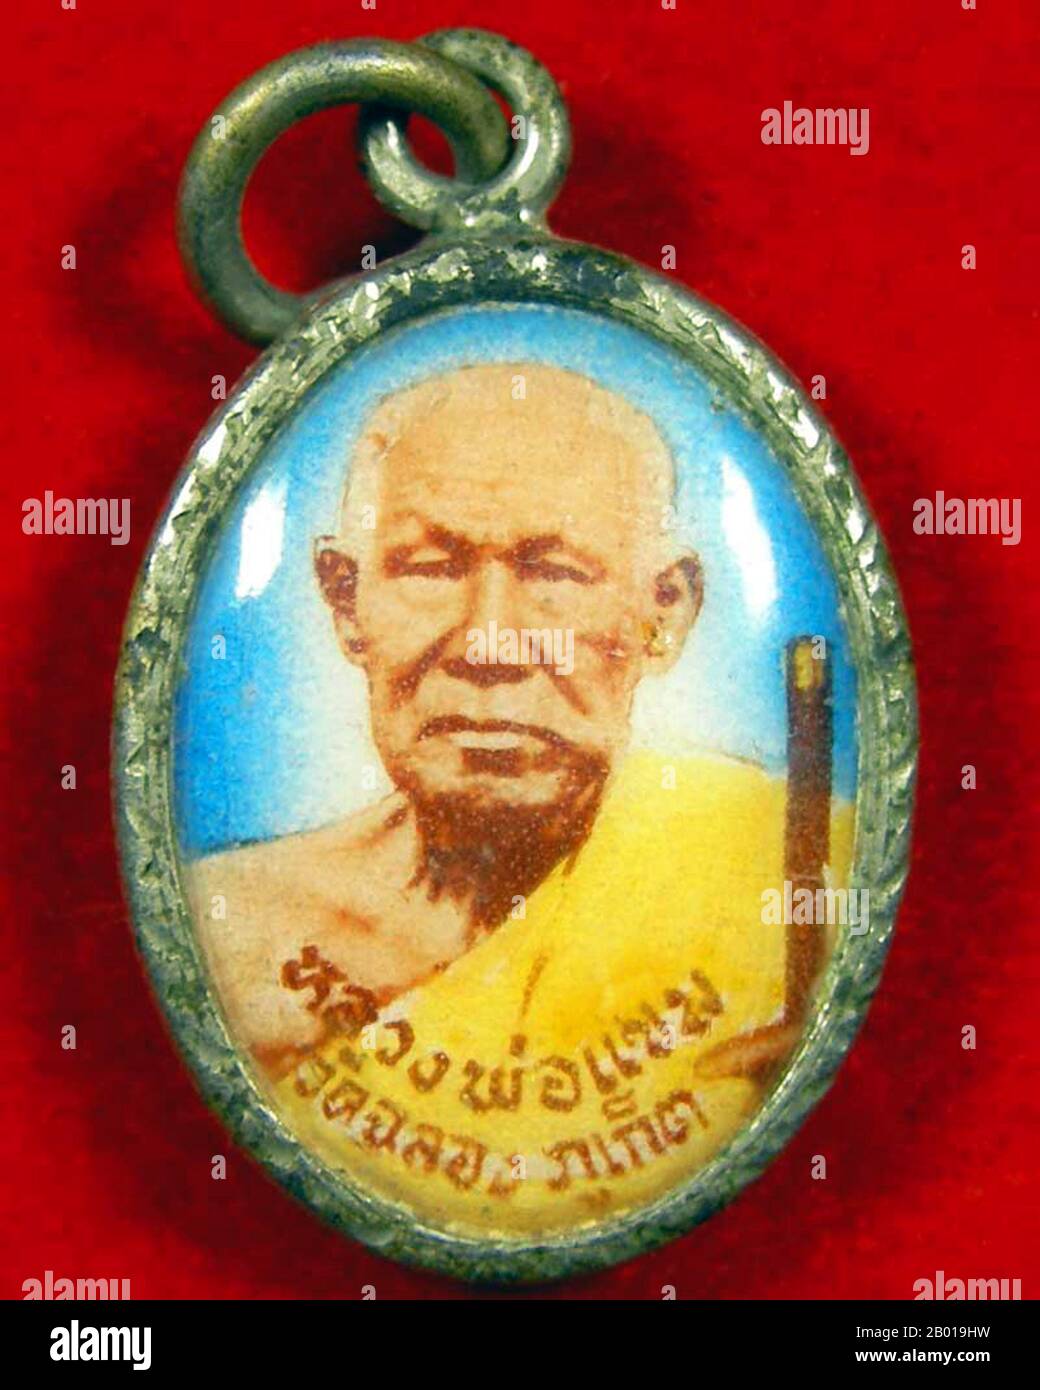 Thailand: An amulet of Luang Pho Chaem, the venerable monk of Wat Chalong, Phuket.  Wat Chalong in Phuket's Chalong District is delicated to two highly venerable monks, Luang Pho Chaem and Luang Pho Chuang, who were famous for their work in herbal medicine and tending to the ill. During the Phuket tin miners’ rebellion of 1876, they mobilised aid for the injured on both sides. They also mediated in the rebellion, bringing the warring parties together to resolve their dispute. Statues honouring them stand in the sermon hall (viharn) of Wat Chalong. Stock Photo